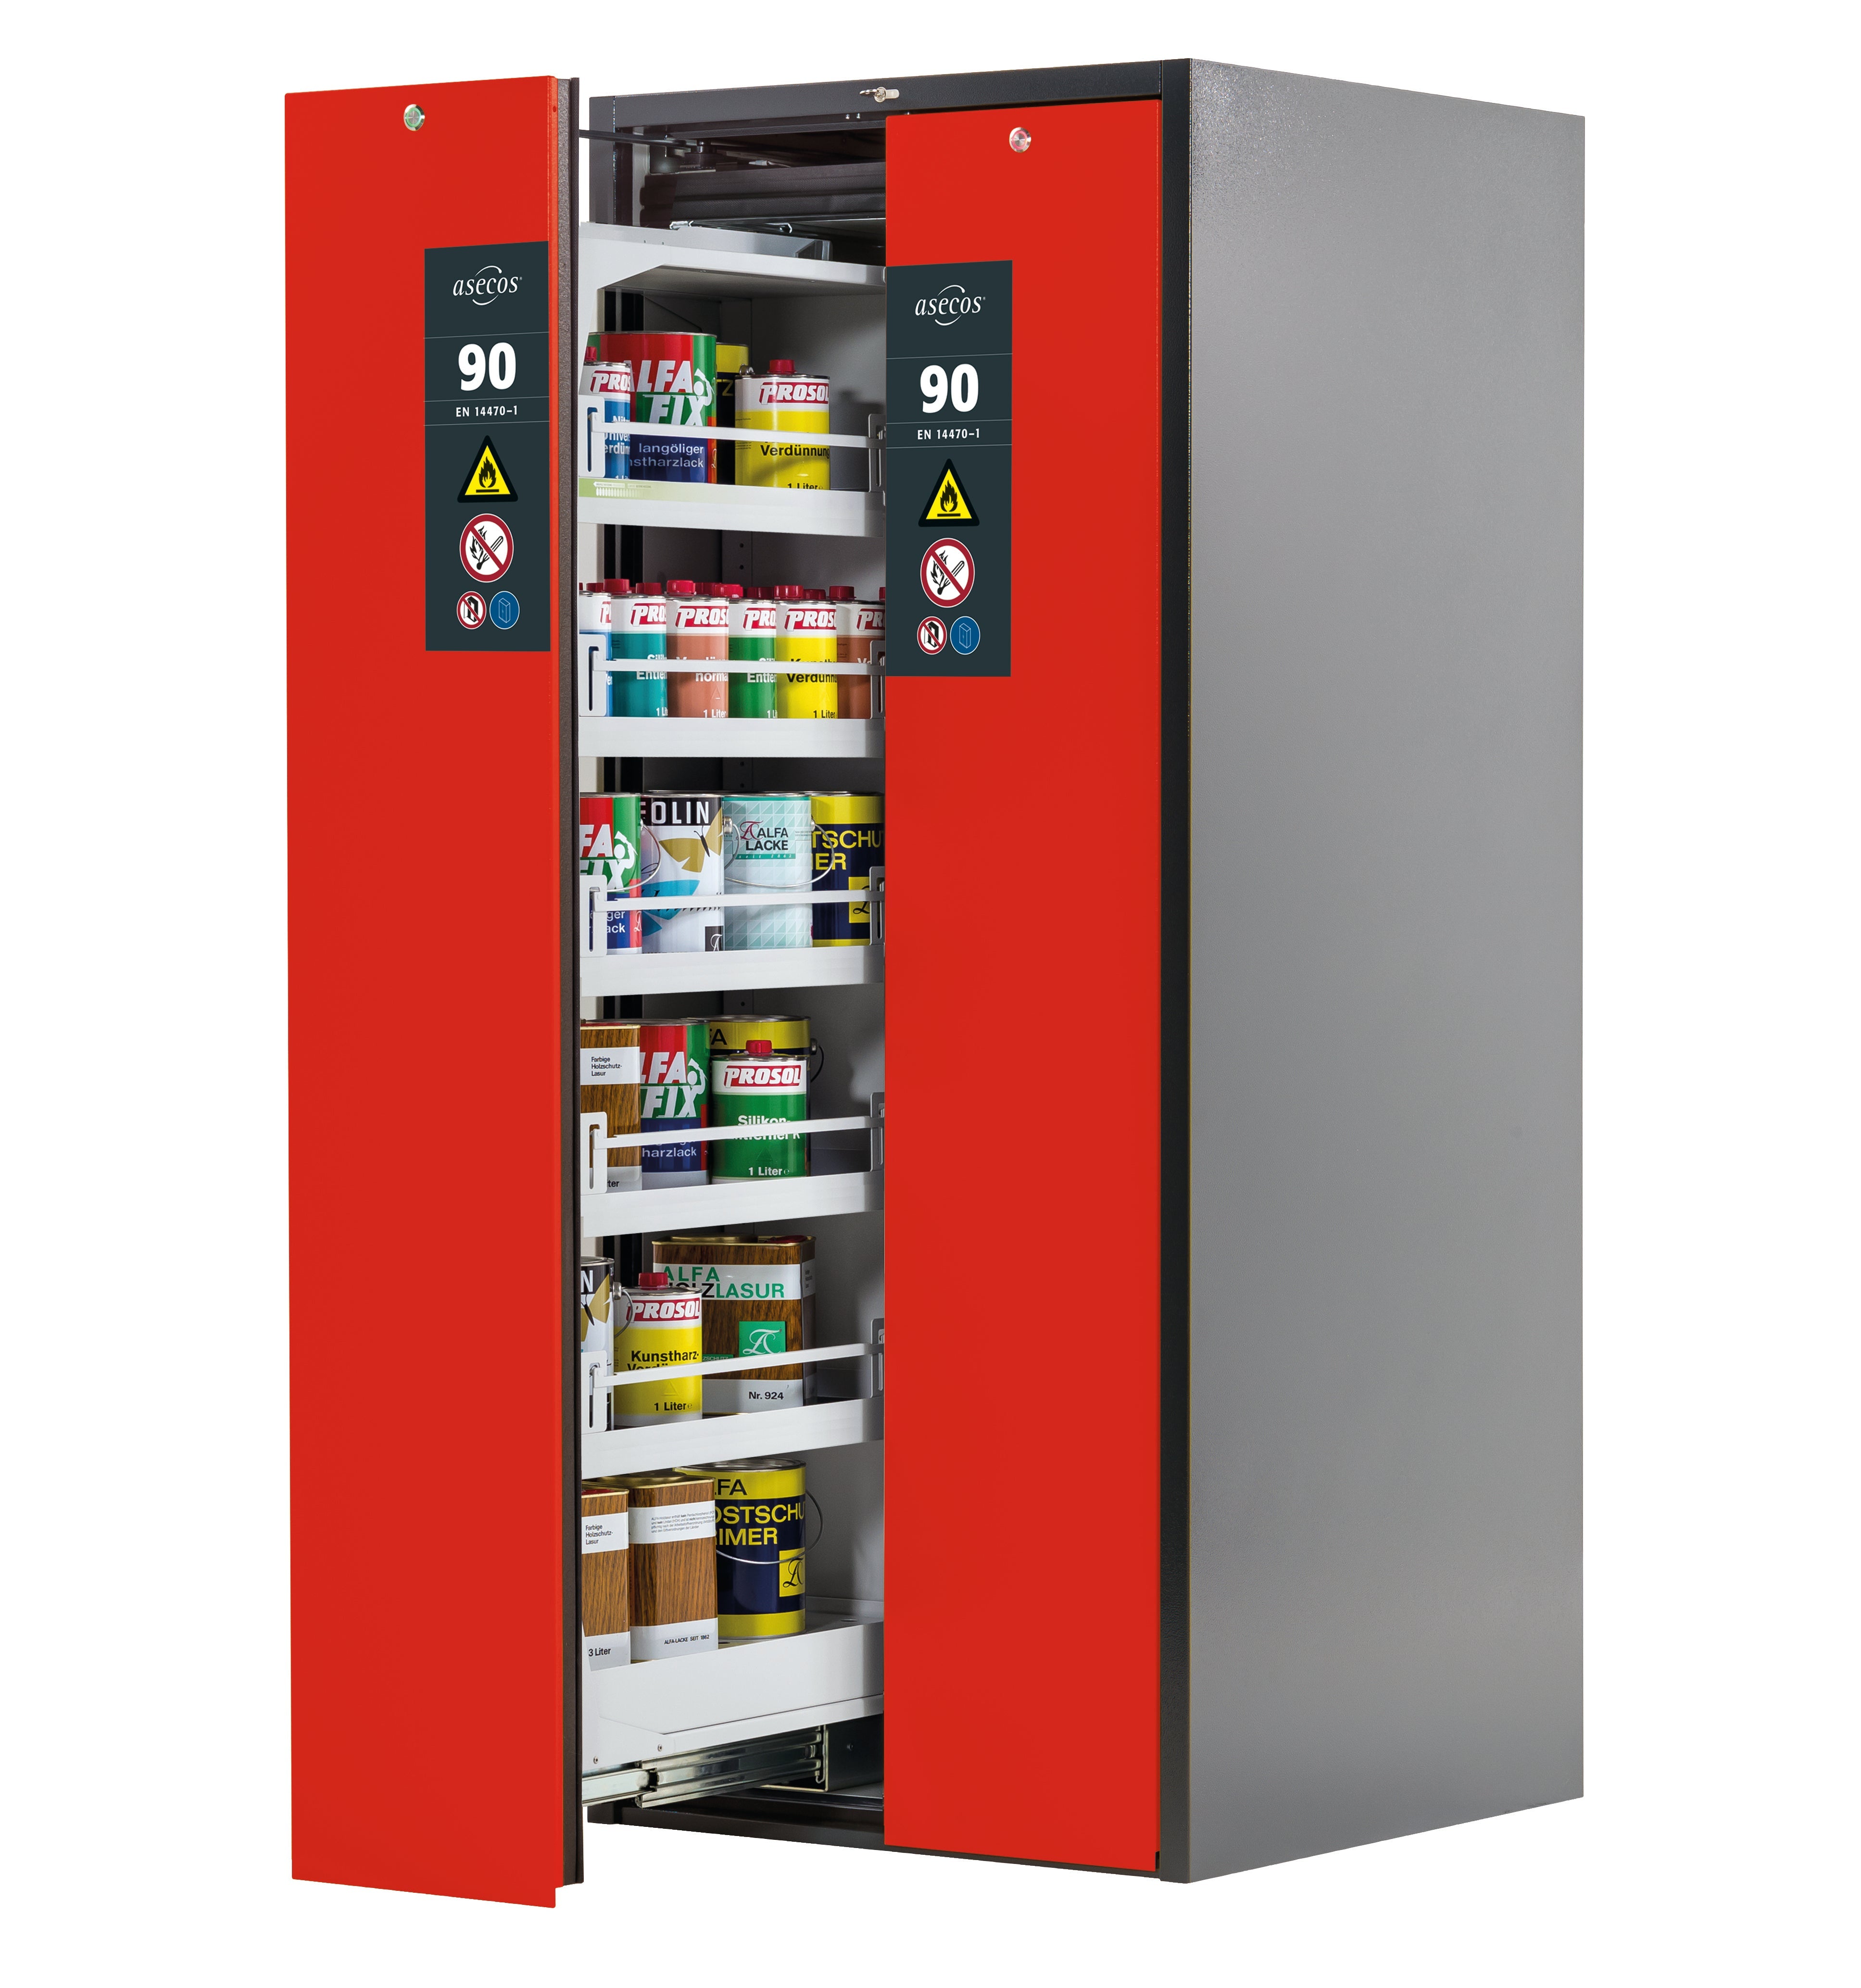 Type 90 safety cabinet V-MOVE-90 model V90.196.081.VDAC:0013 in traffic red RAL 3020 with 5x standard tray base (sheet steel)